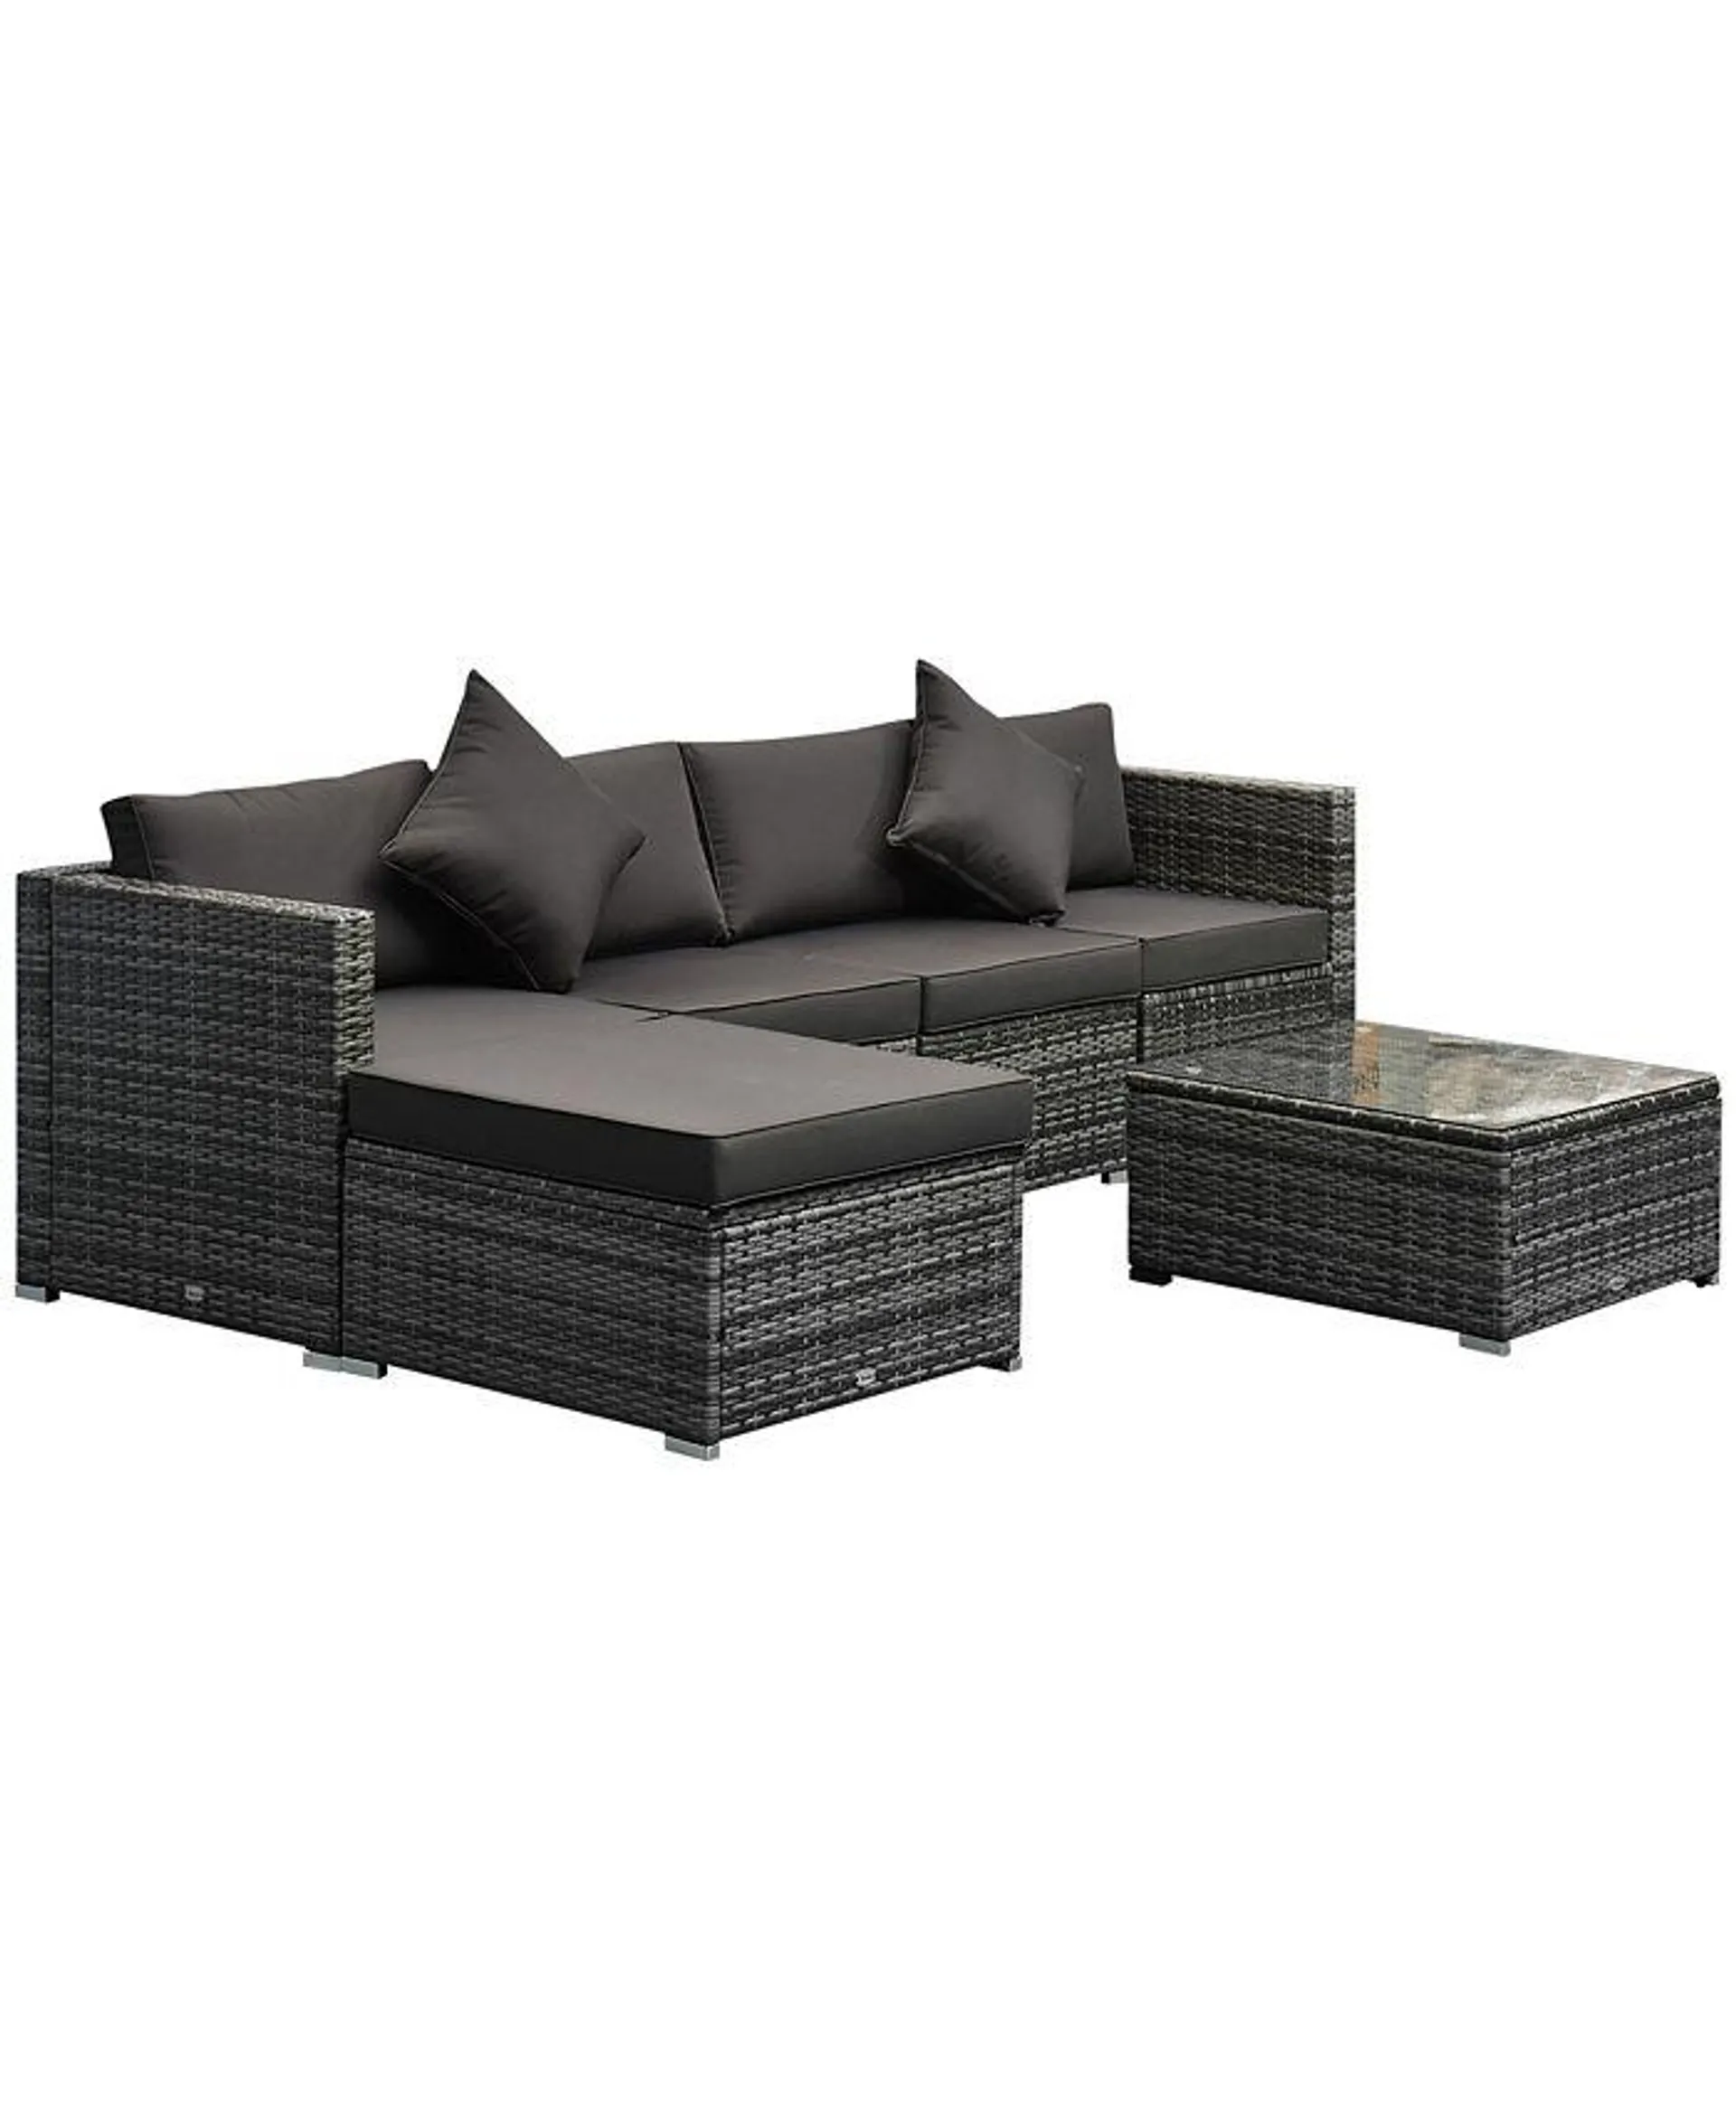 6 Pieces Patio Furniture Sets Outdoor Wicker Conversation Sets All Weather PE Rattan Sectional sofa set with Ottoman, Cushions & Tempered Glass Desktop, Charcoal